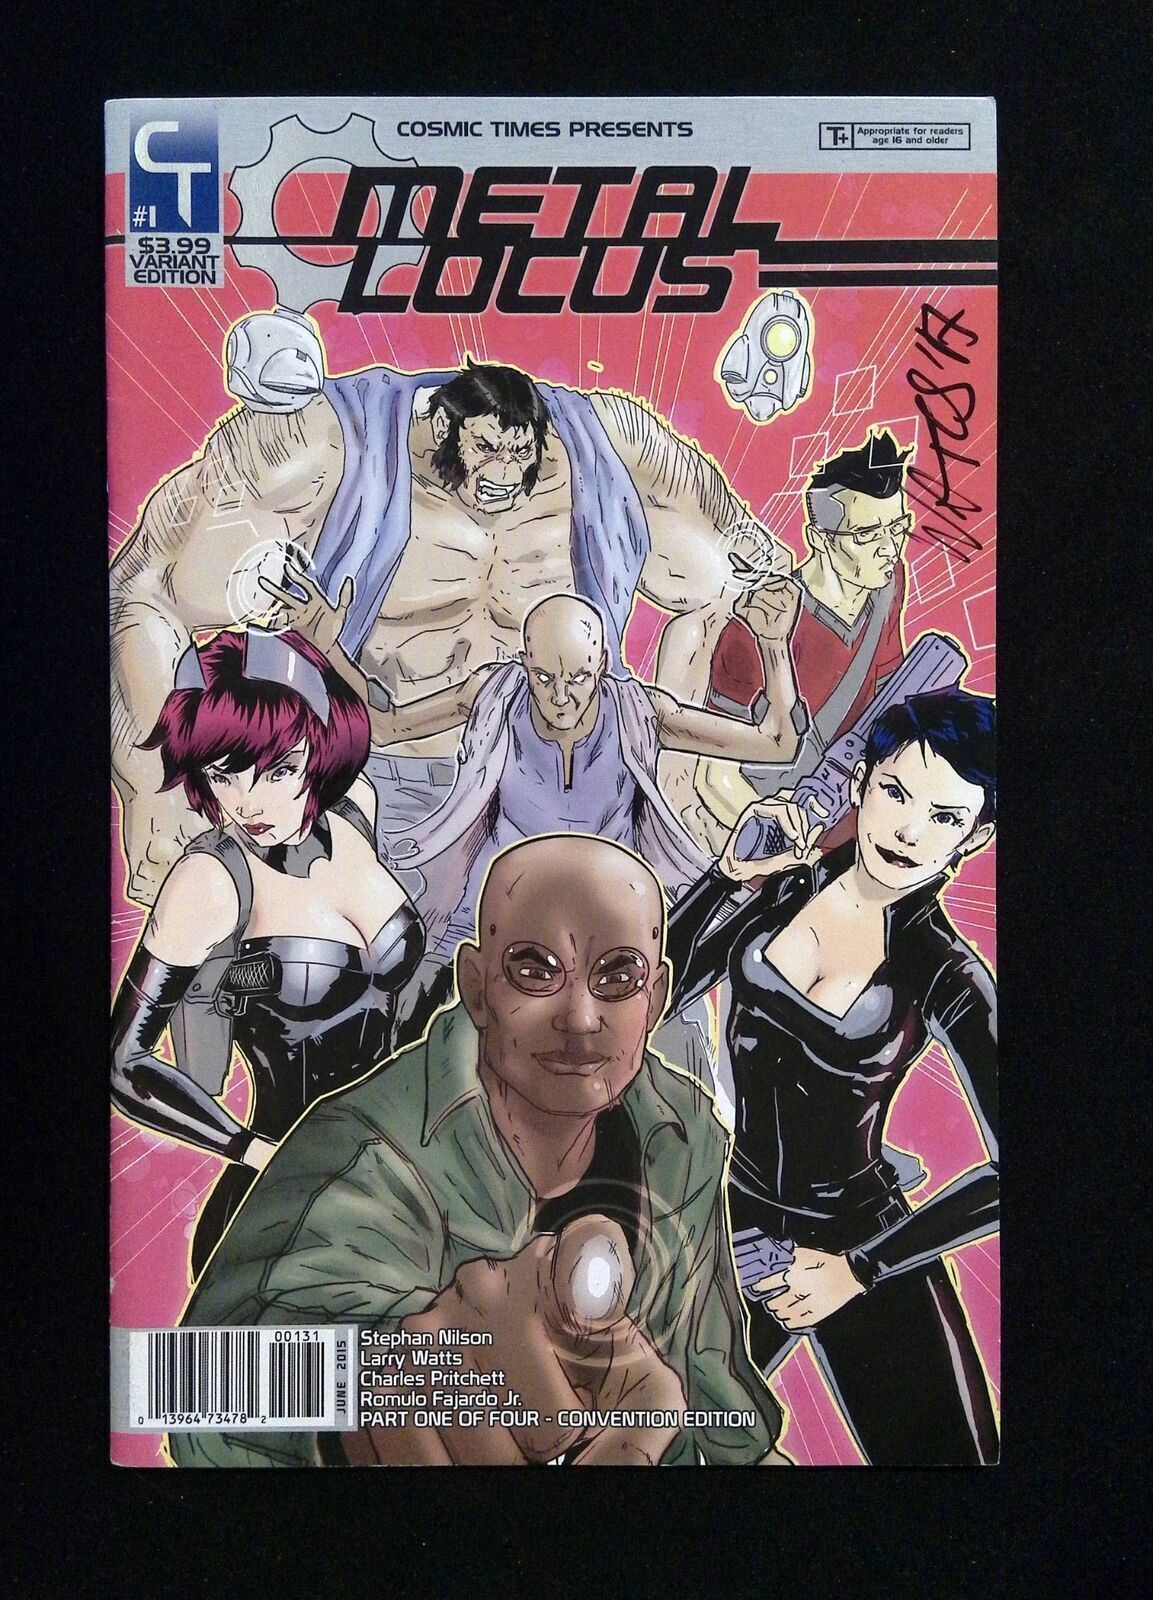 Metal Locus #1 Cosmic Times 2015 VF+ CONVENTION VARIANT SIGNED BY WATTS, RARE